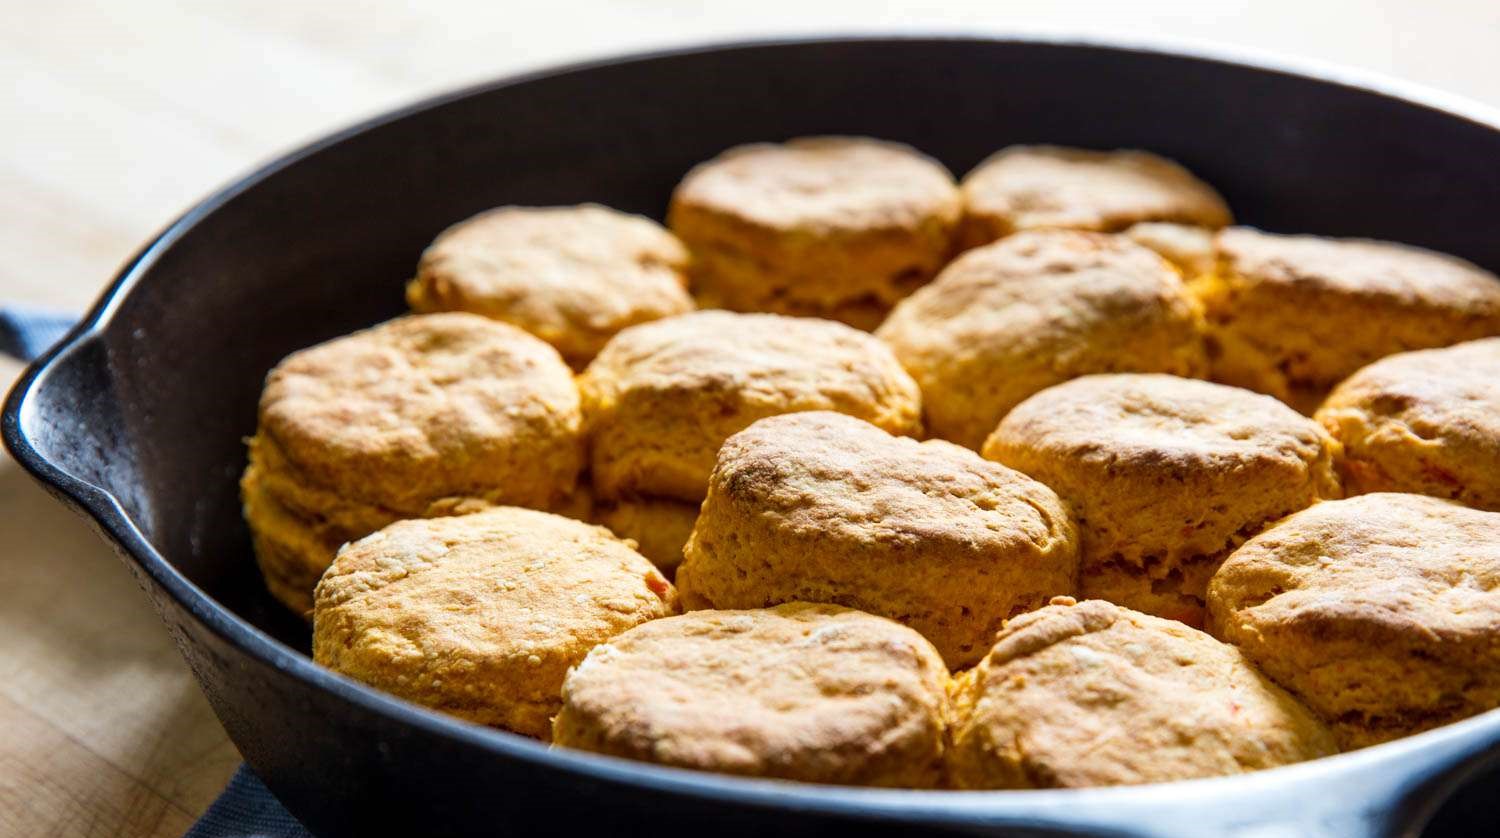 How To Cook Biscuits In An Electric Skillet